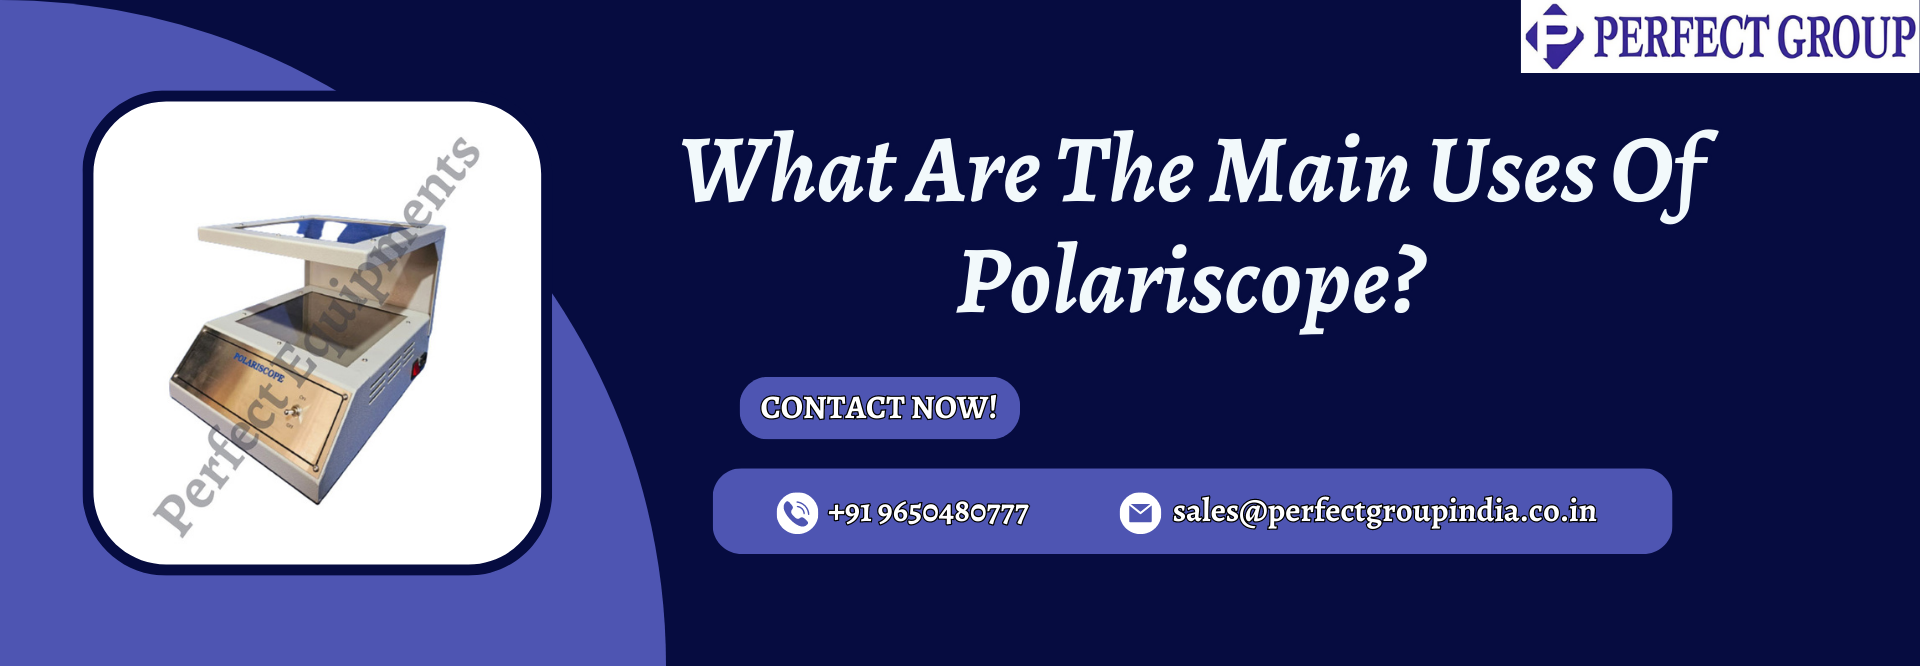 What Are The Main Uses Of Polariscope?